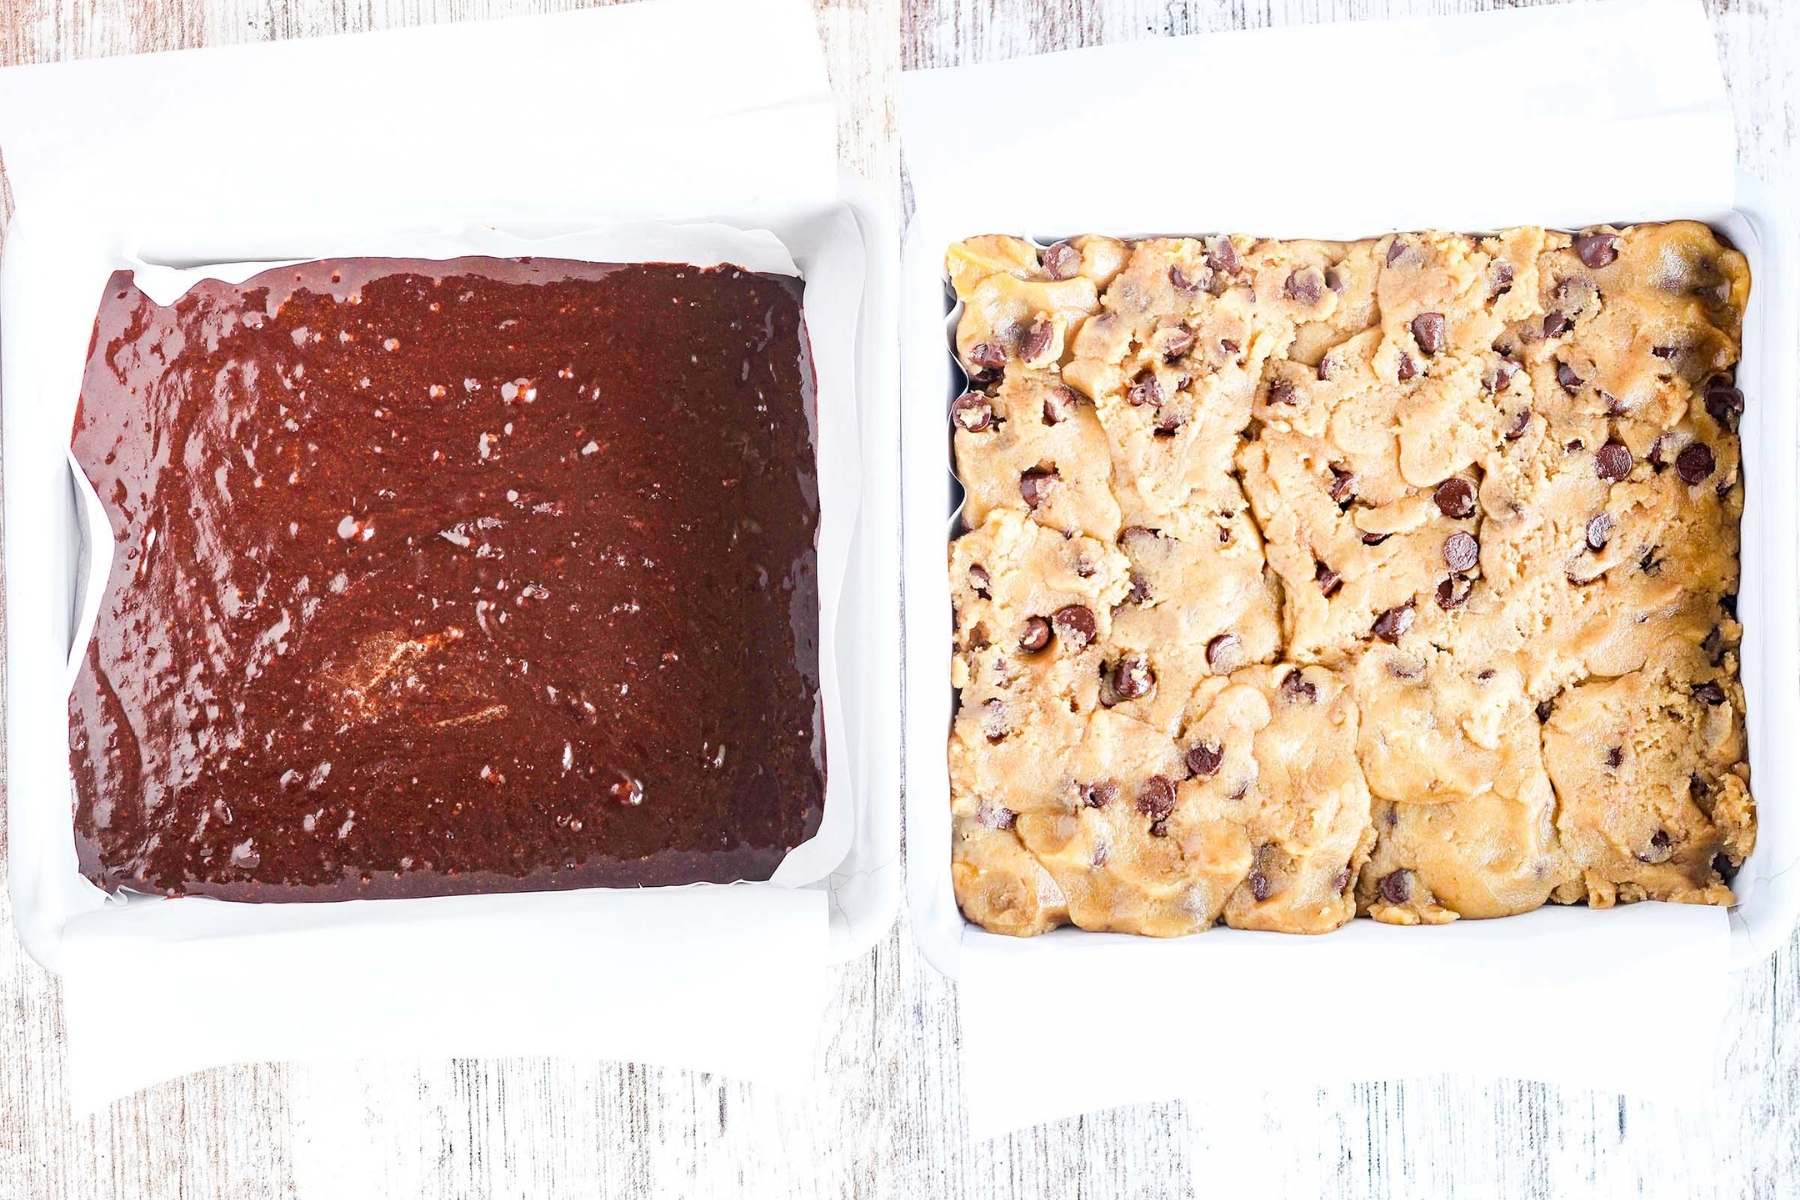 Side by side of brownie layer and chocolate chip cookie layer.